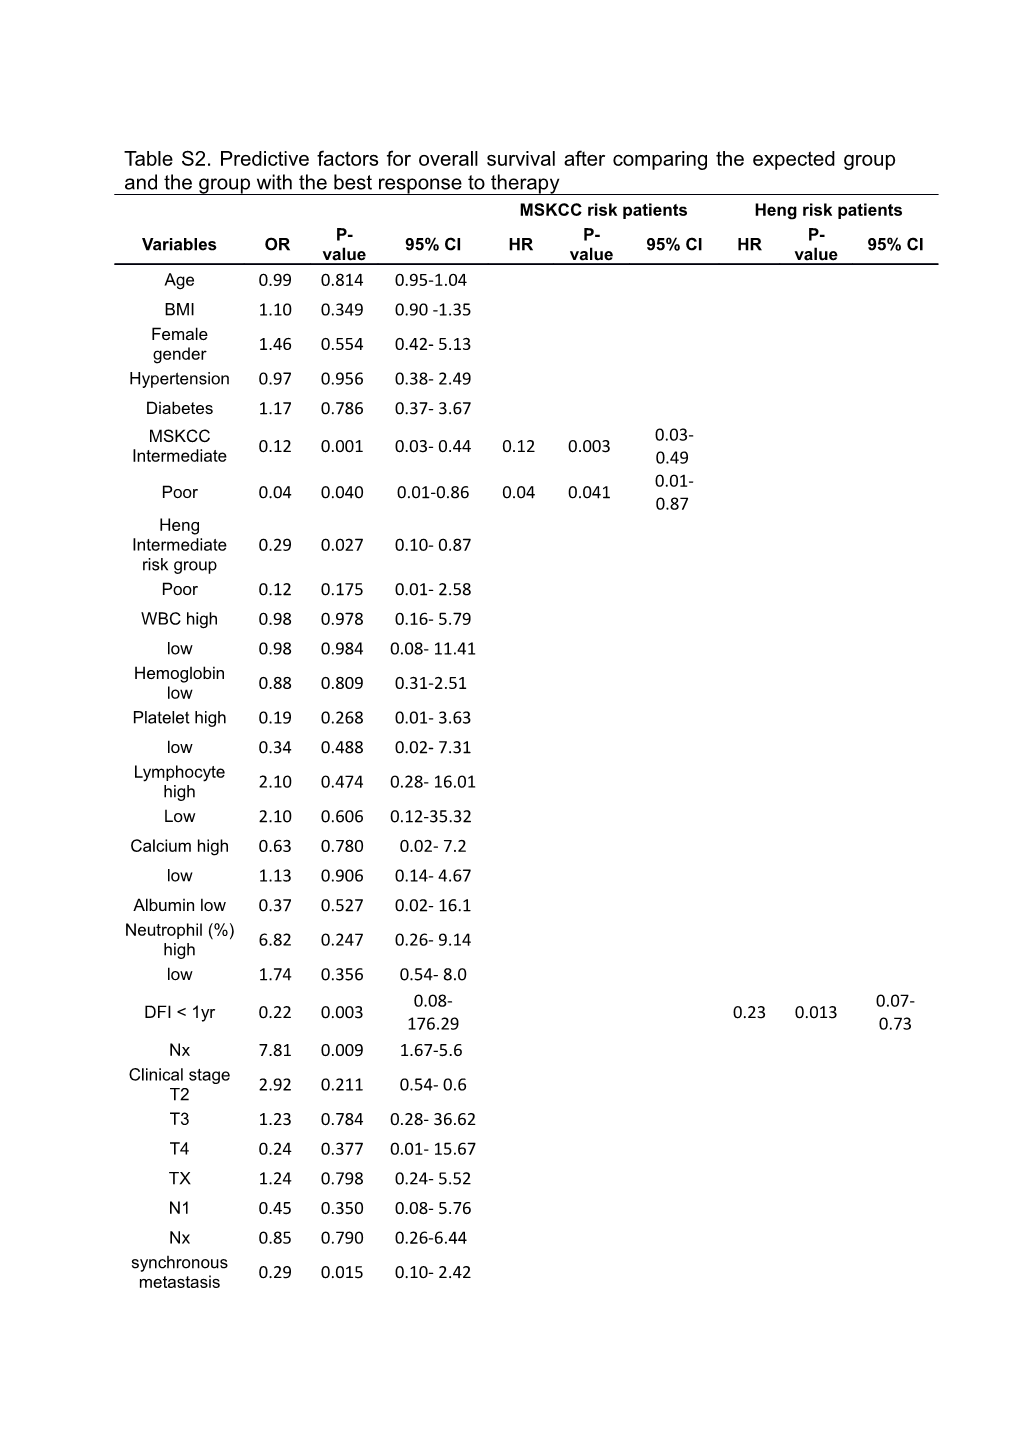 Table S1. Predictive Factors for Progression-Free Survival After Comparing the Expected